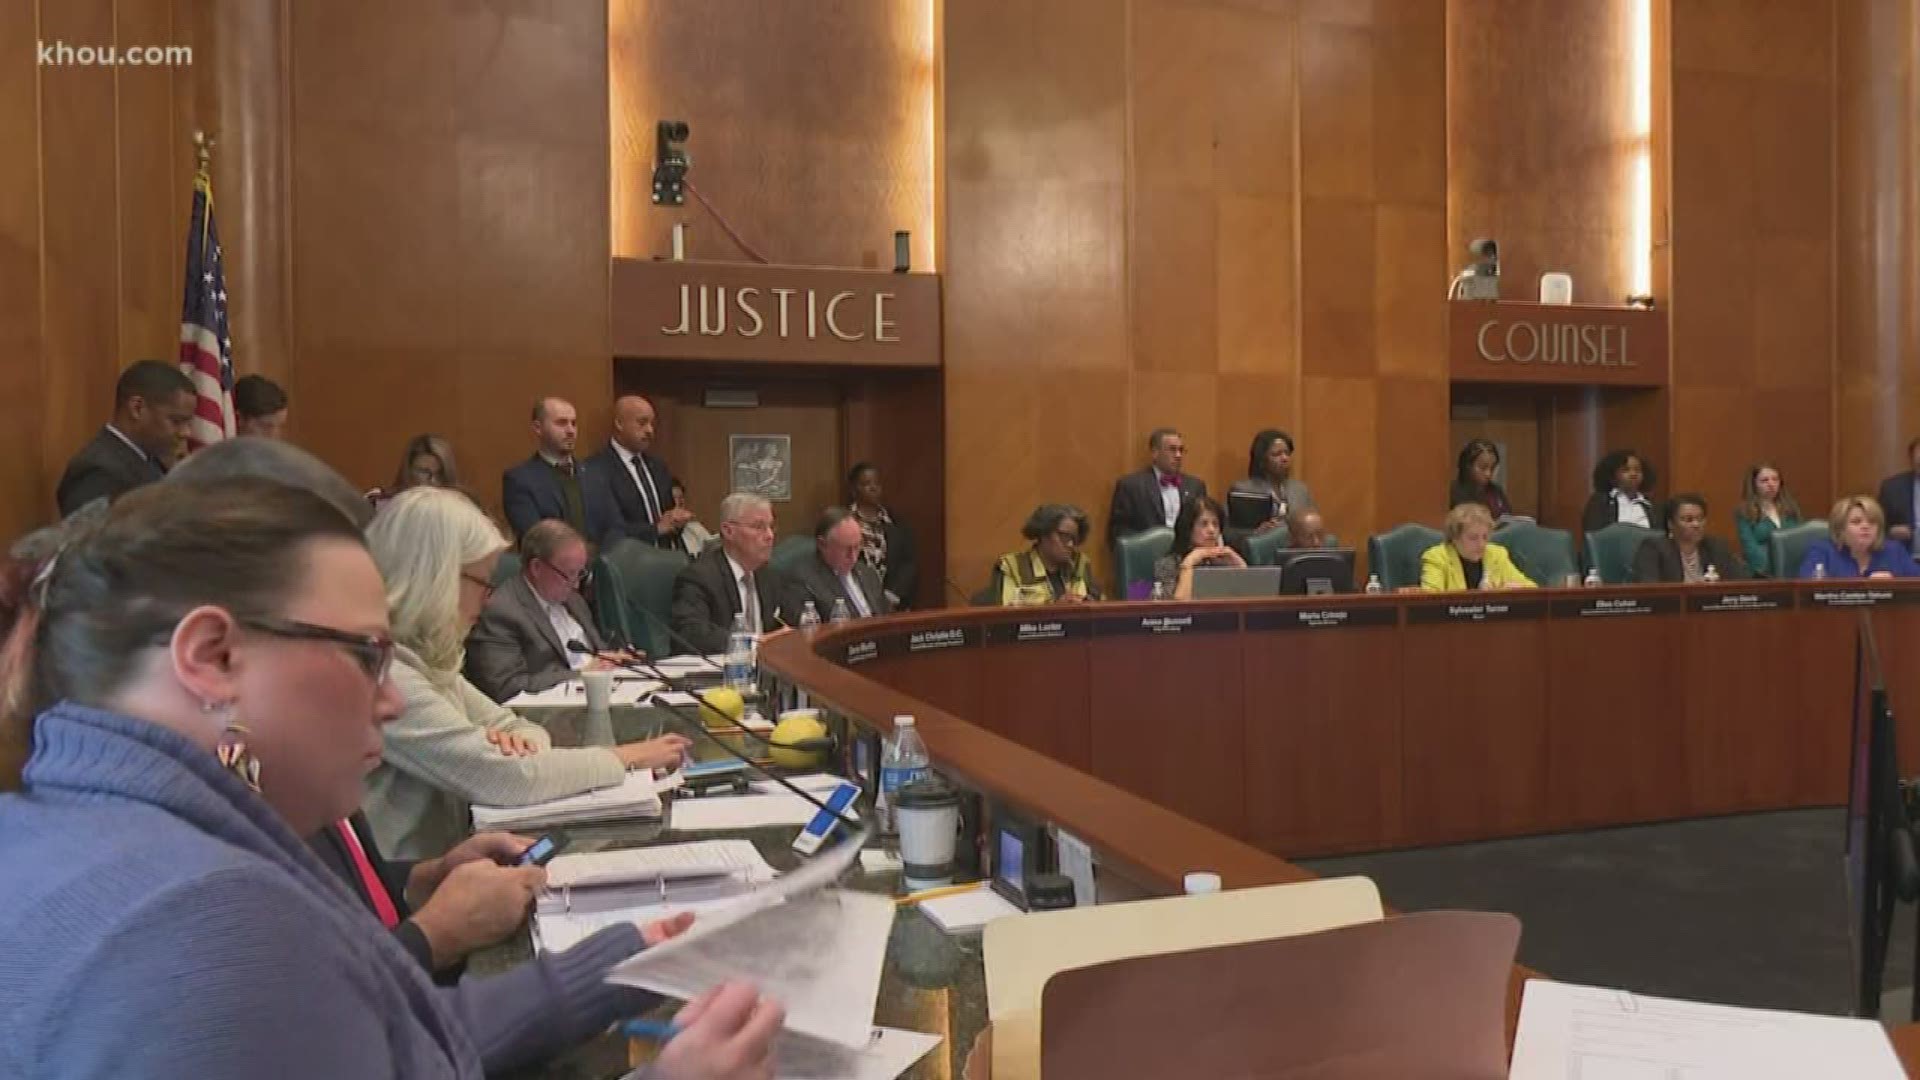 A Houston city council member delayed votes on nearly the entire meeting agenda Wednesday morning because he says Mayor Turner has ignored his requests to swear in 68 firefighters that have already completed training.